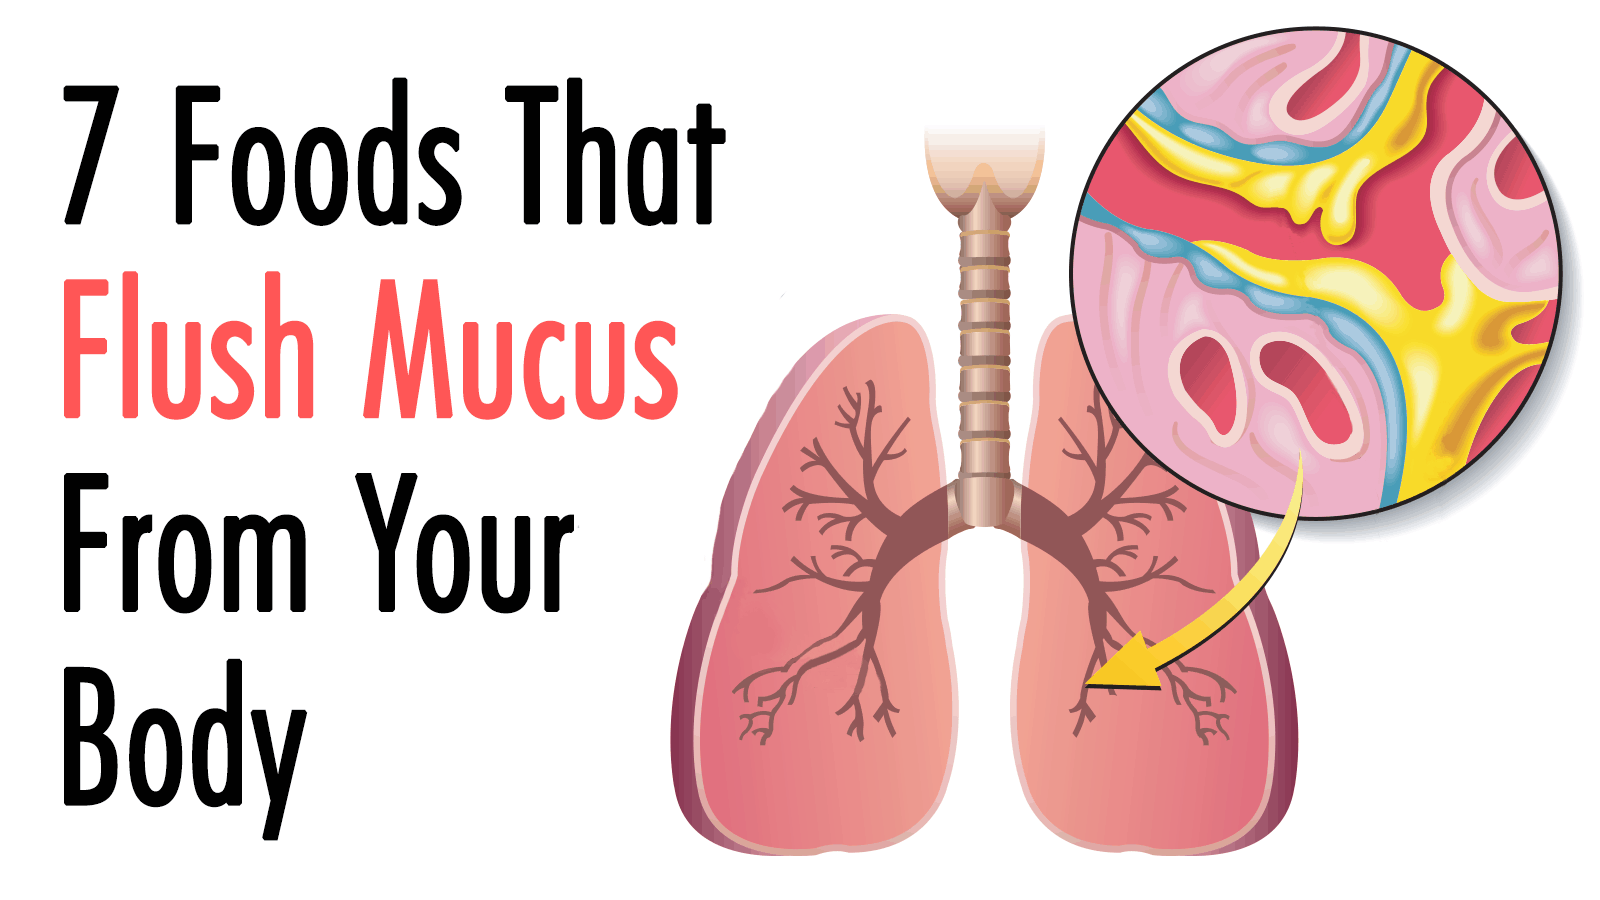 7 Foods That Flush Mucus From Your Body